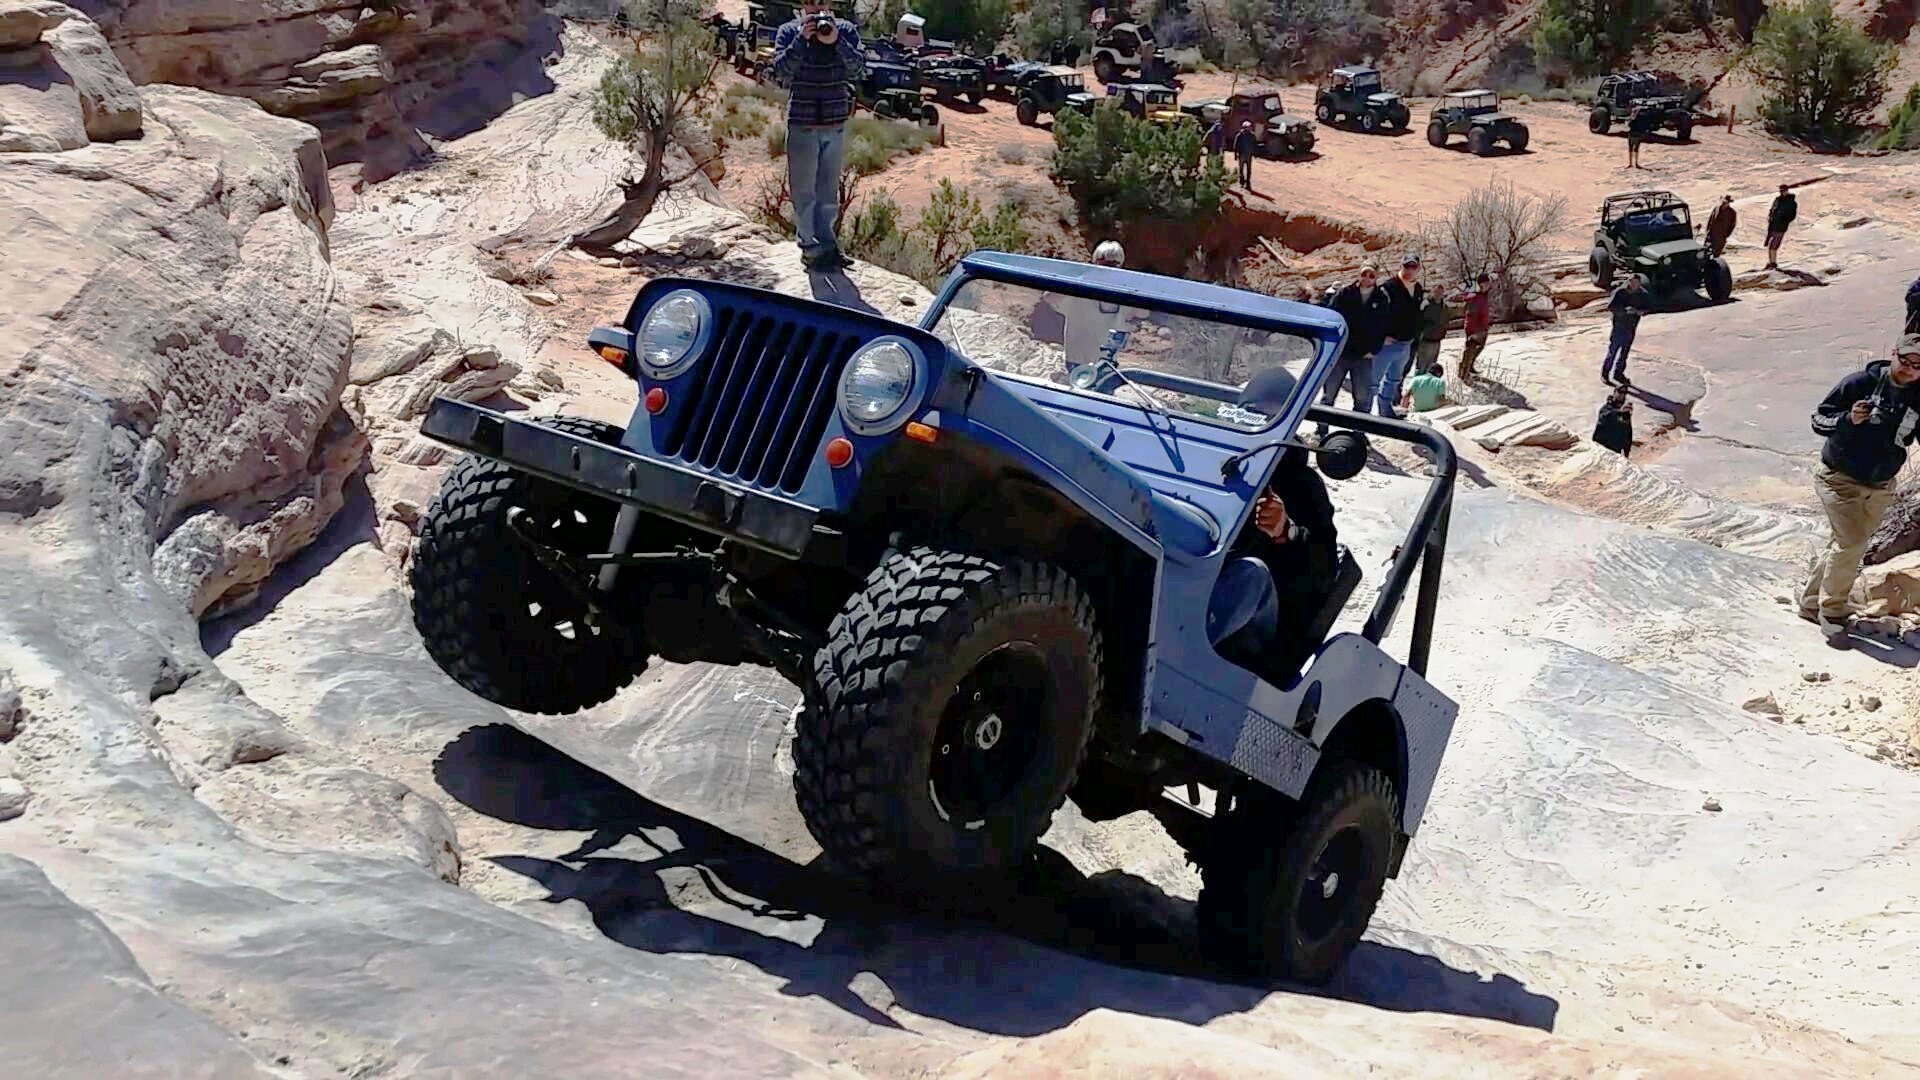 Conquering "Wipe Out Hill" in Moab, Utah